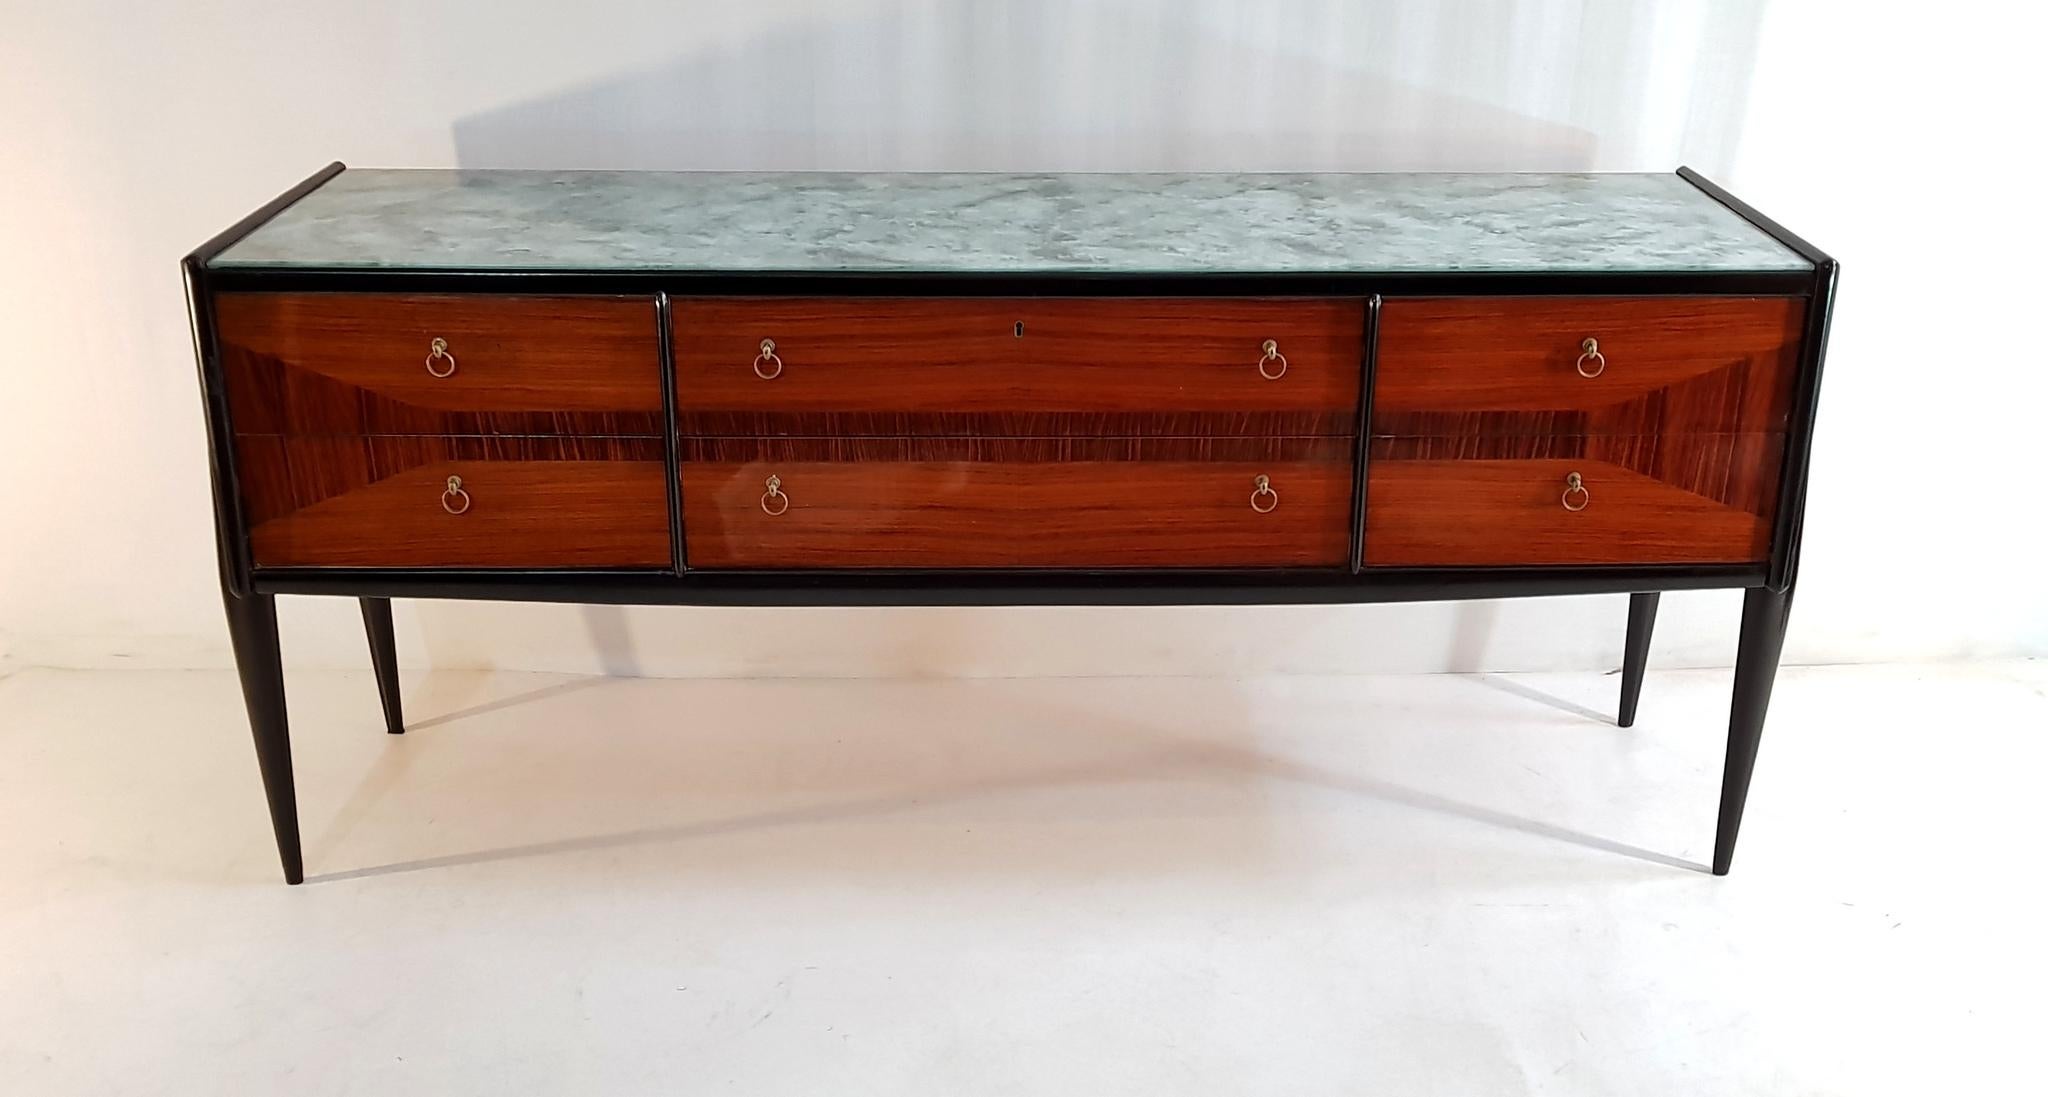 The credenza has six drawers with an intricate marquetry design in teak in a high gloss finish and with a top in glass made to imitate stone. In excellent restored condition and comes with the original key.